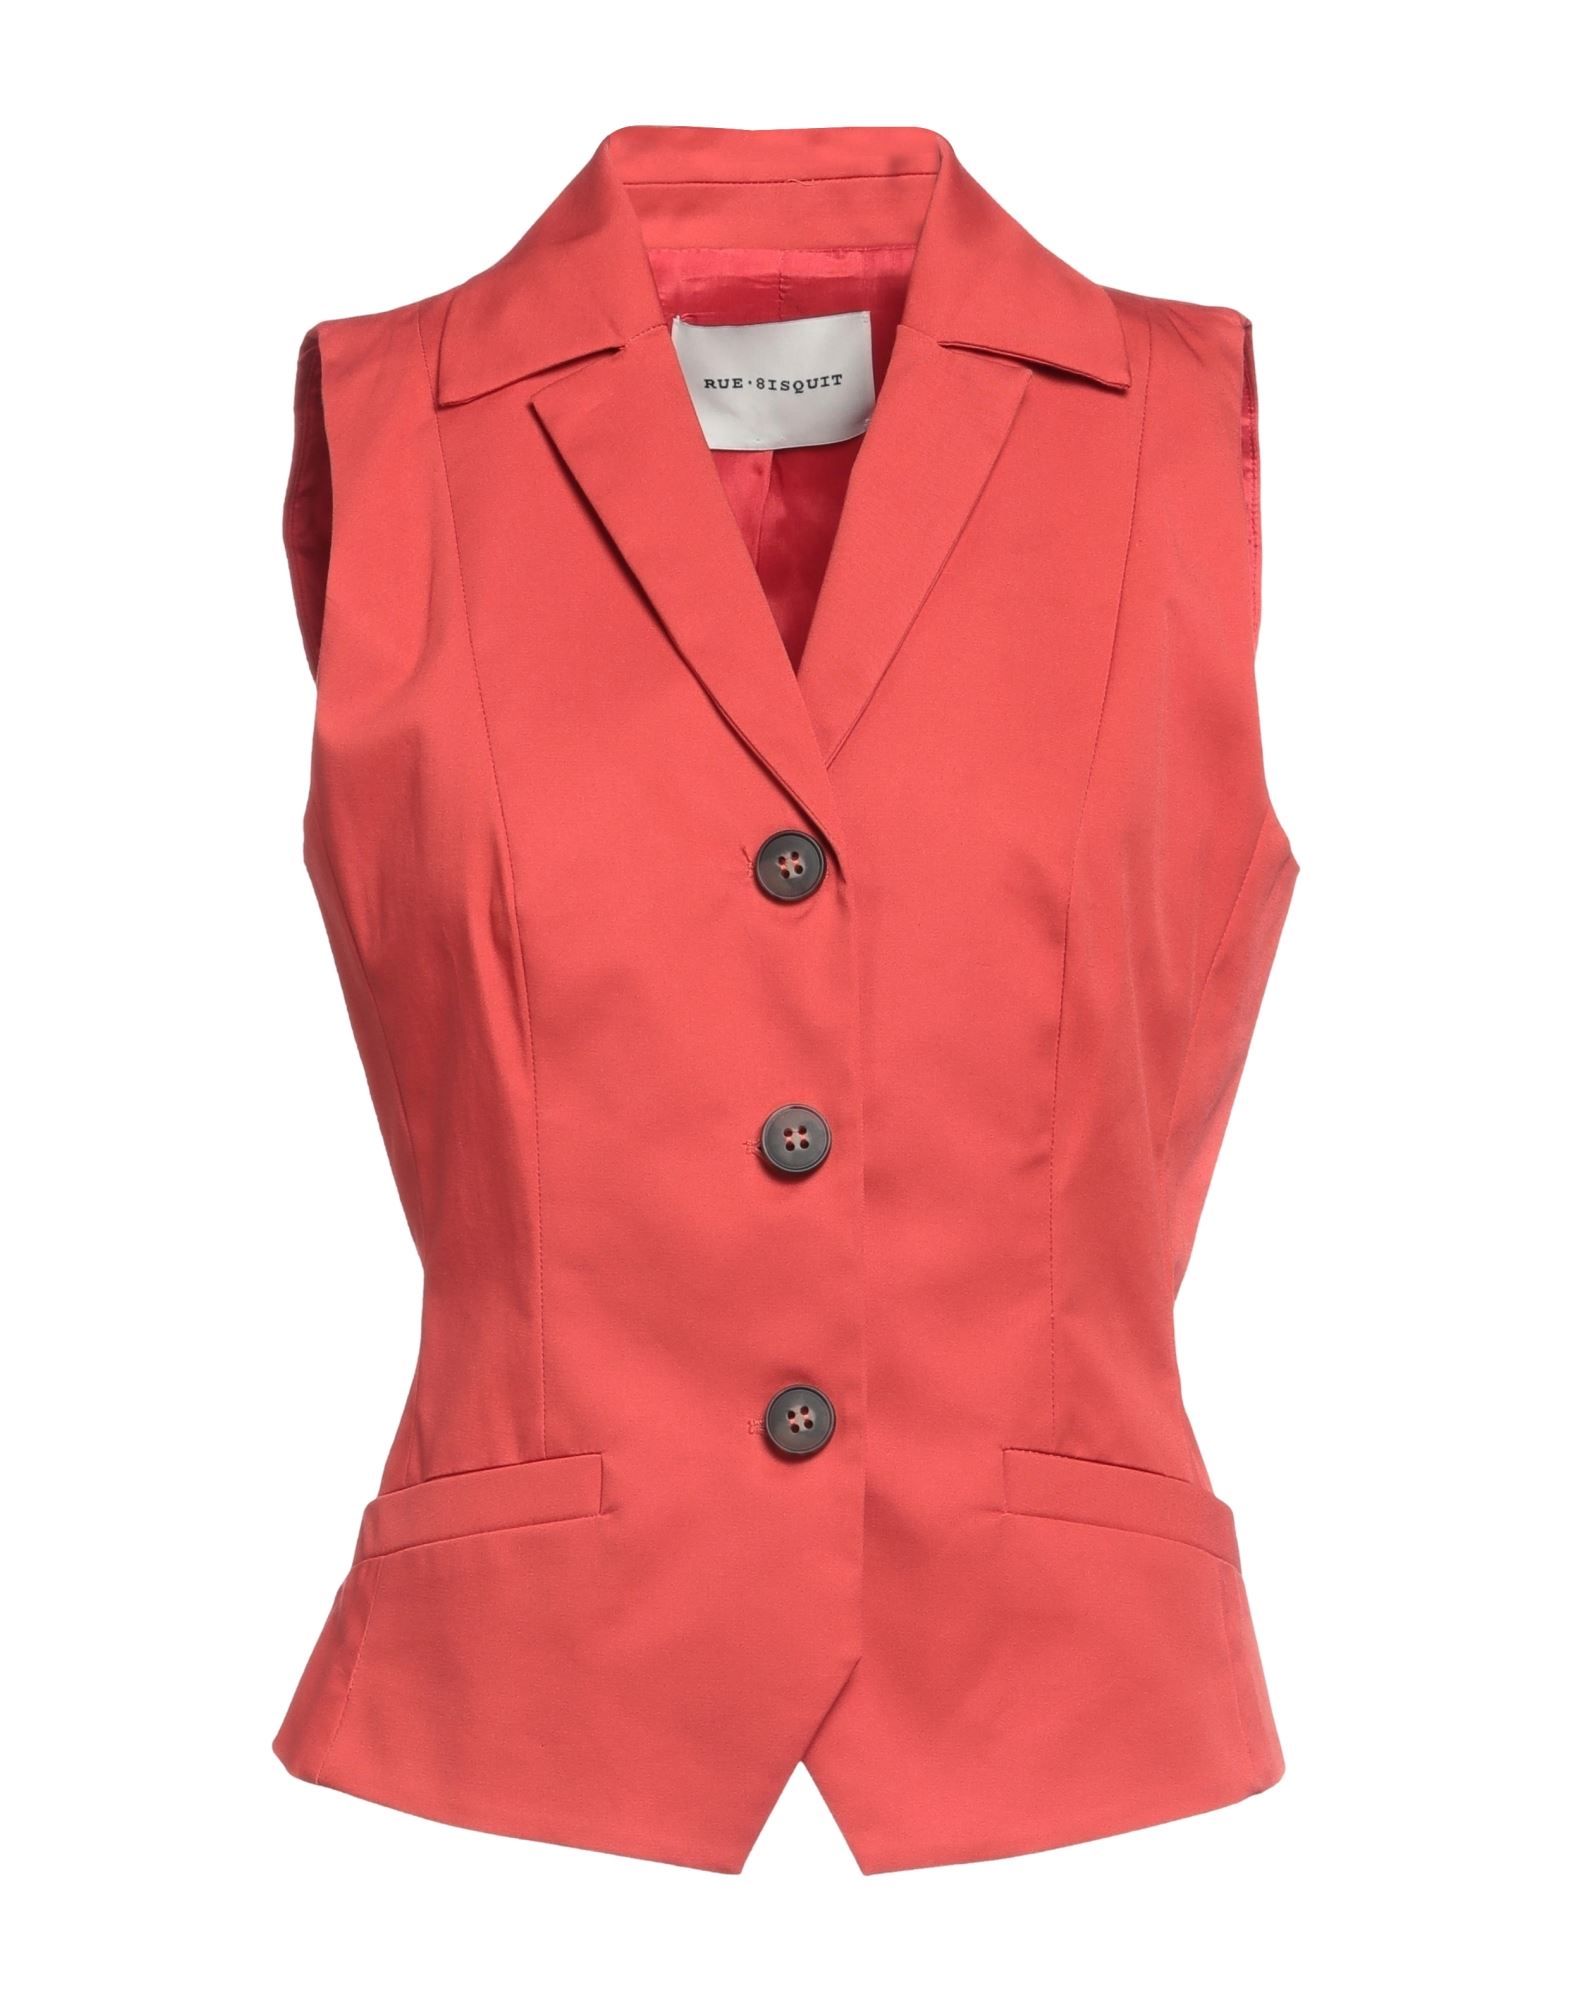 Rue 8isquit Suit Jackets In Red